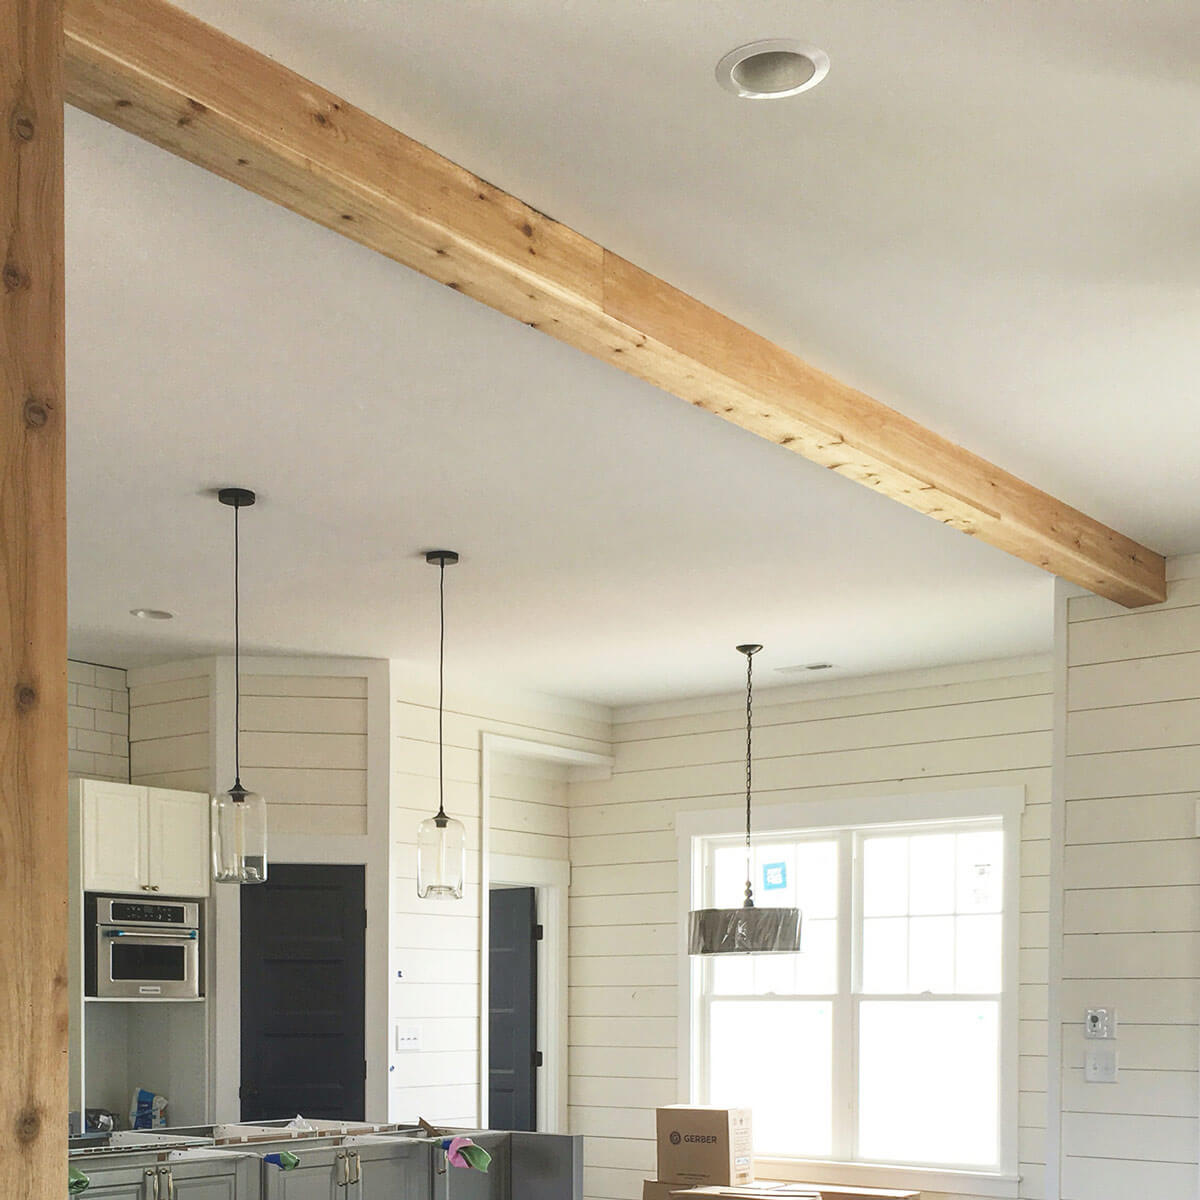 Rustic Unfinished Beams With White Painted Shiplap